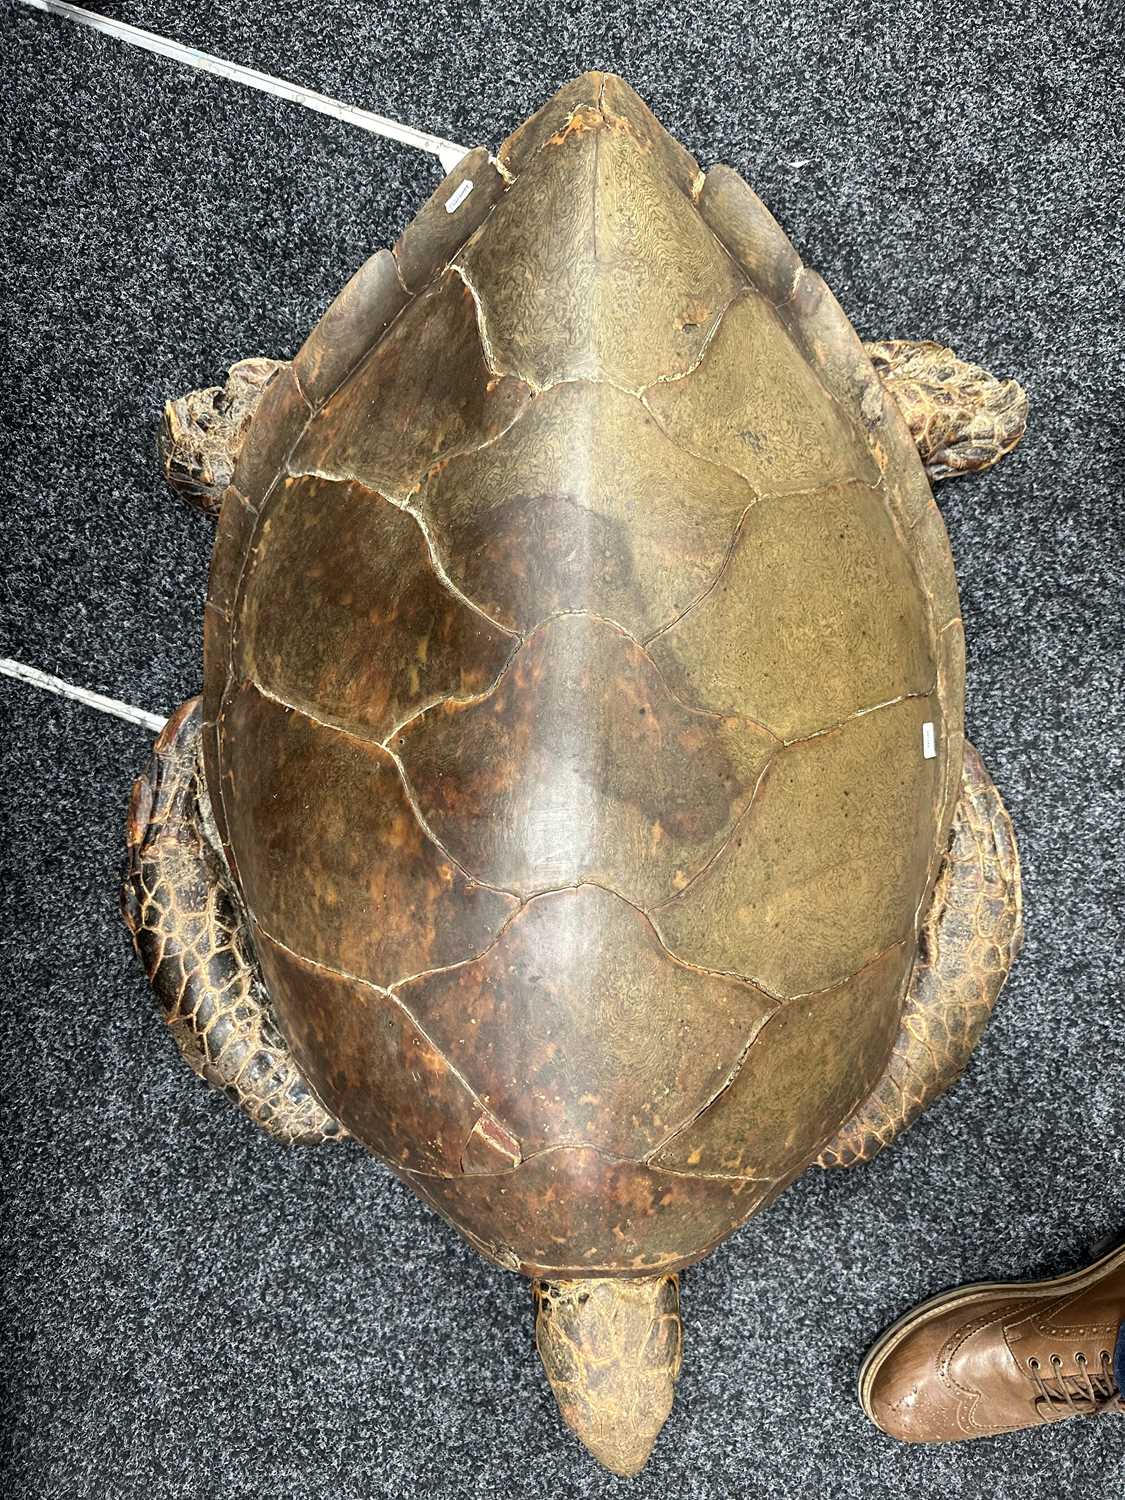 A LARGE LATE 19TH CENTURY TAXIDERMY HAWKSBILL TURTLE - Image 13 of 30